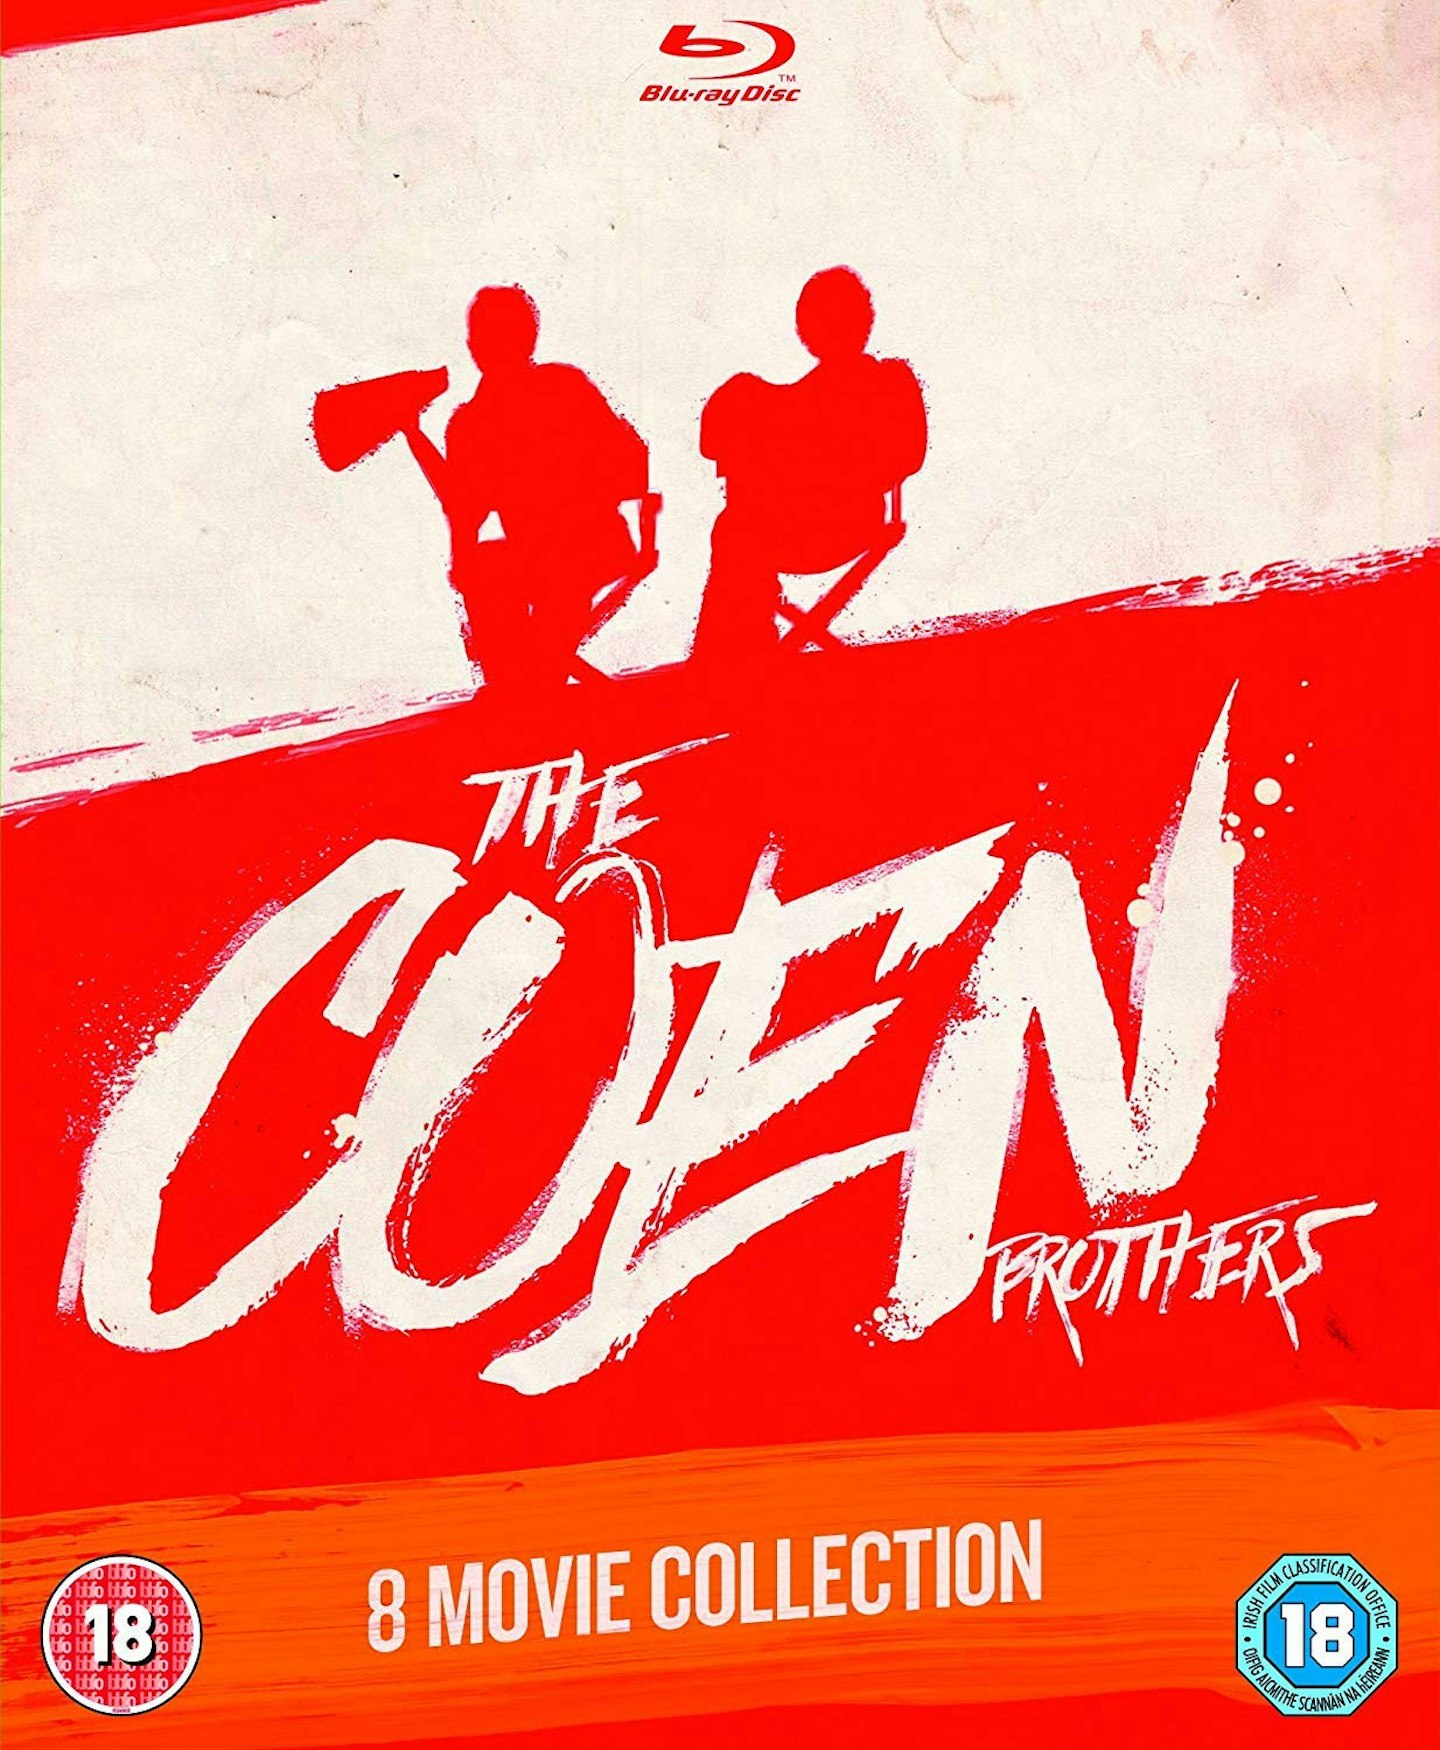 The Coen Brothers: Director's Collection, Blu-ray